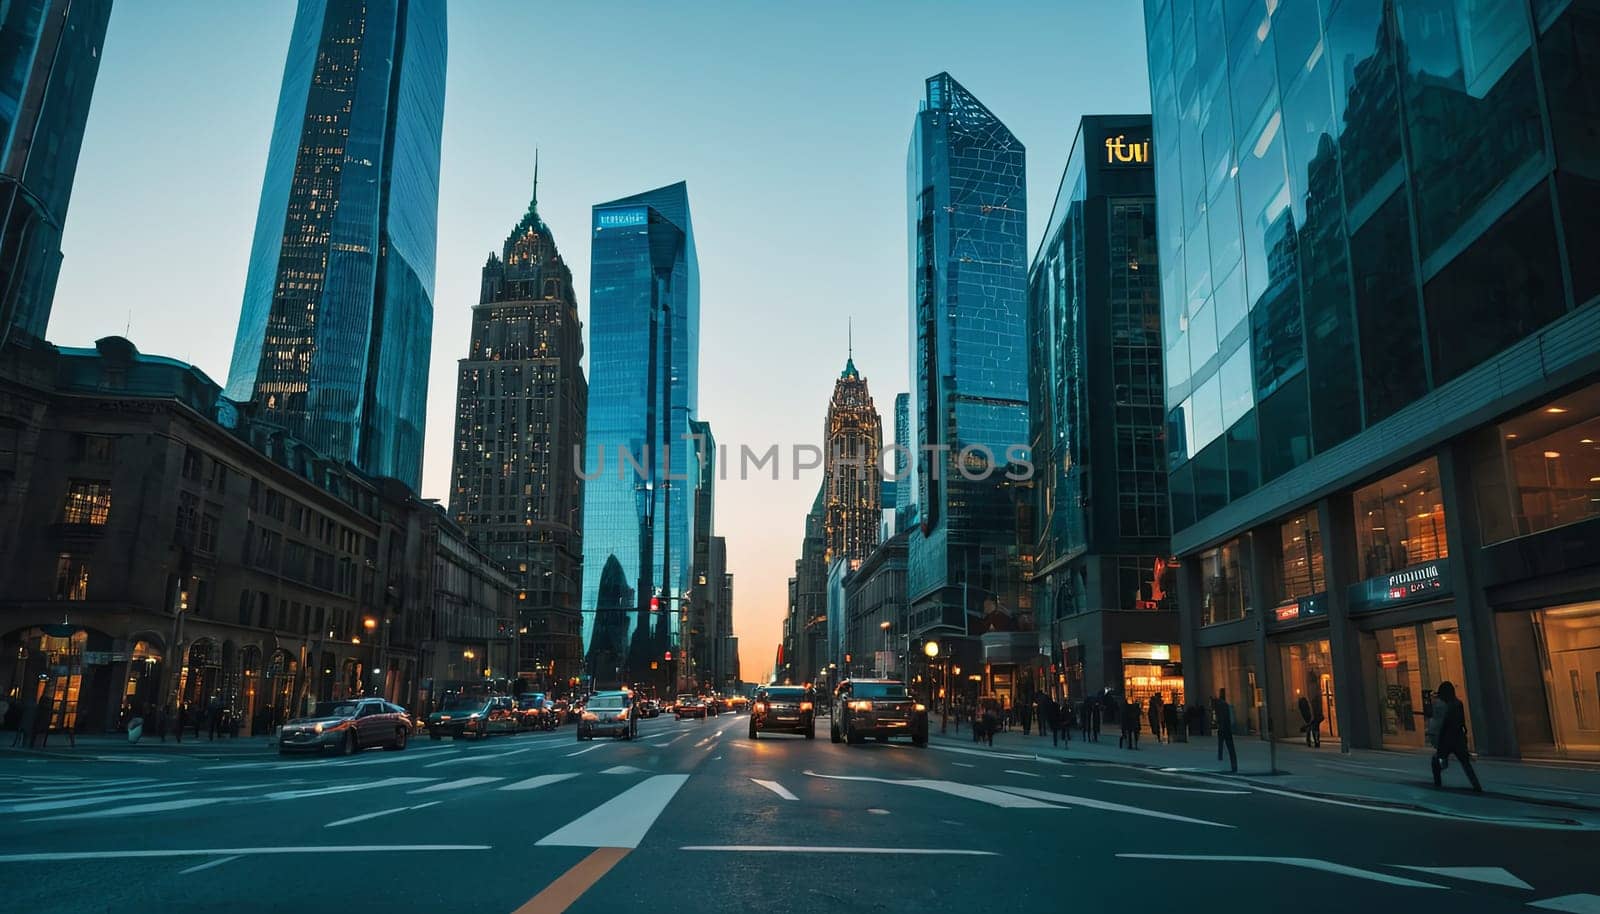 A busy city street with tall buildings and lots of traffic. The sky is a beautiful blue color